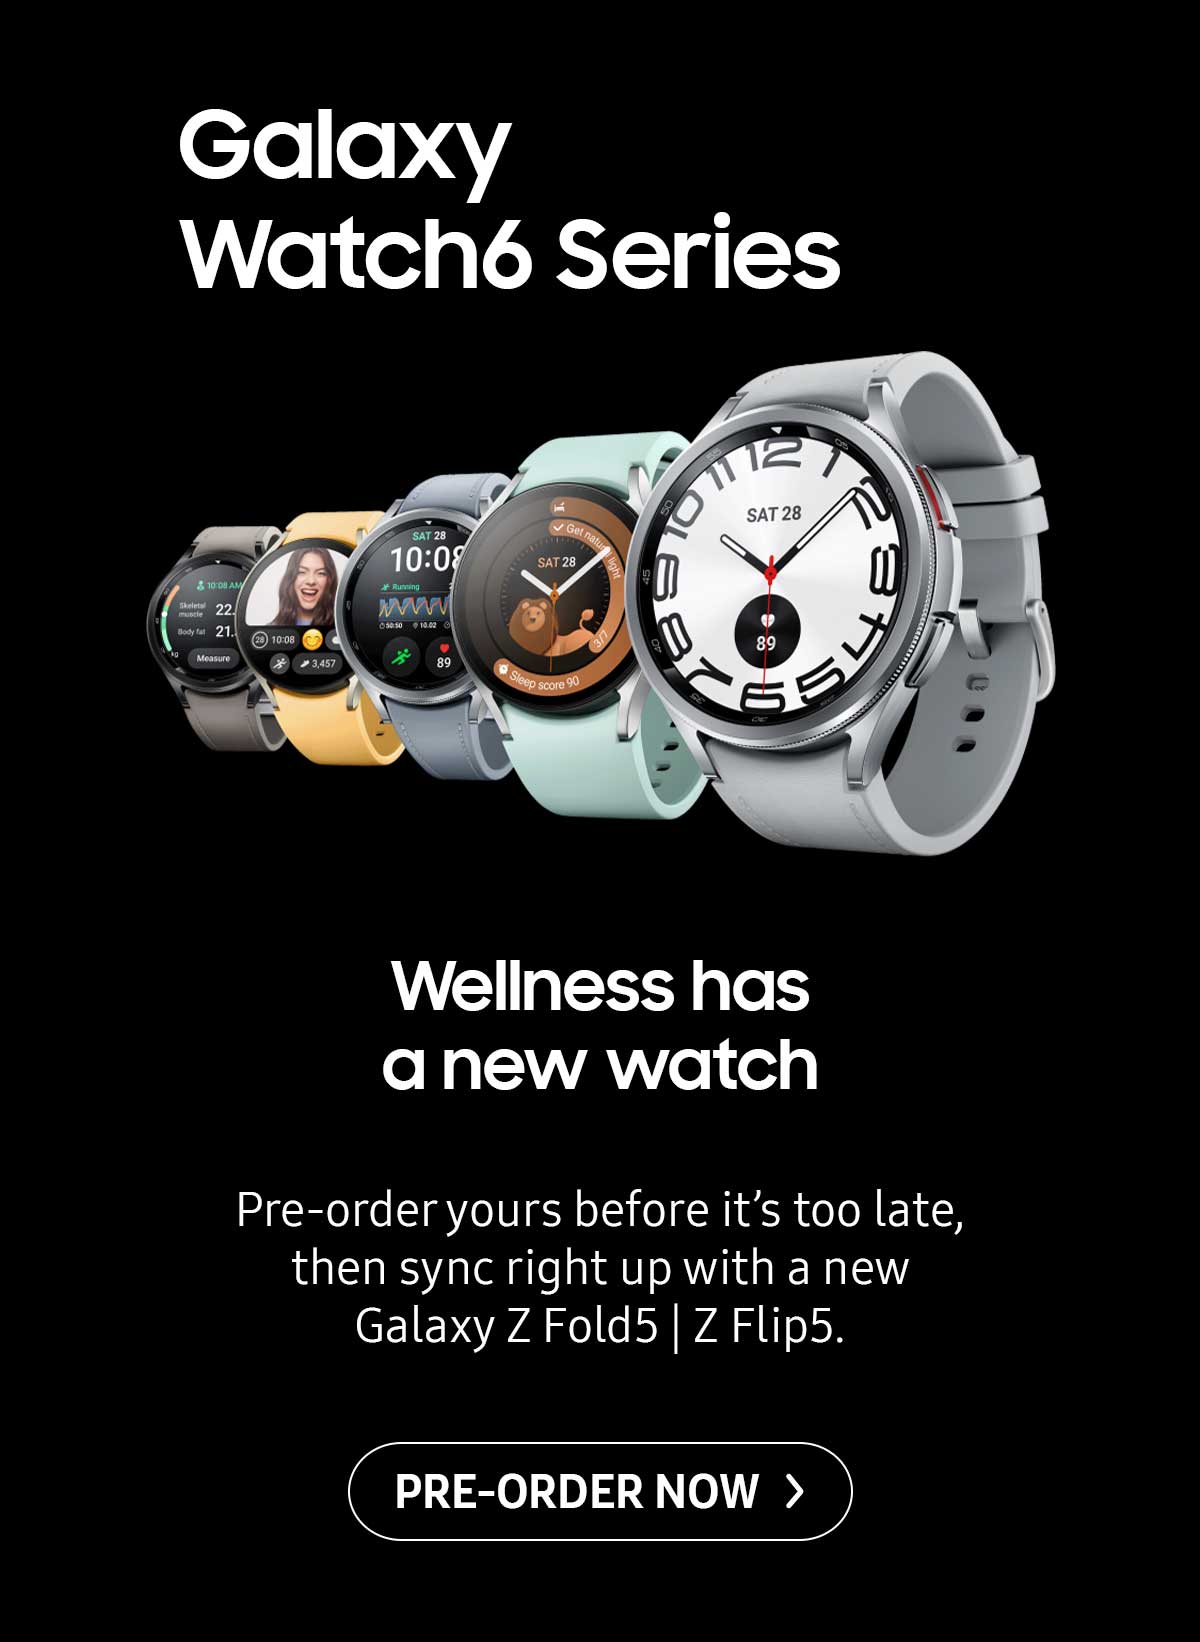 Galaxy Watch6 Series. Wellness has a new watch. Pre-order yours before it's too late, then sync right up with a new Galaxy Z Fold5 | Z Flip5. Pre-order now!